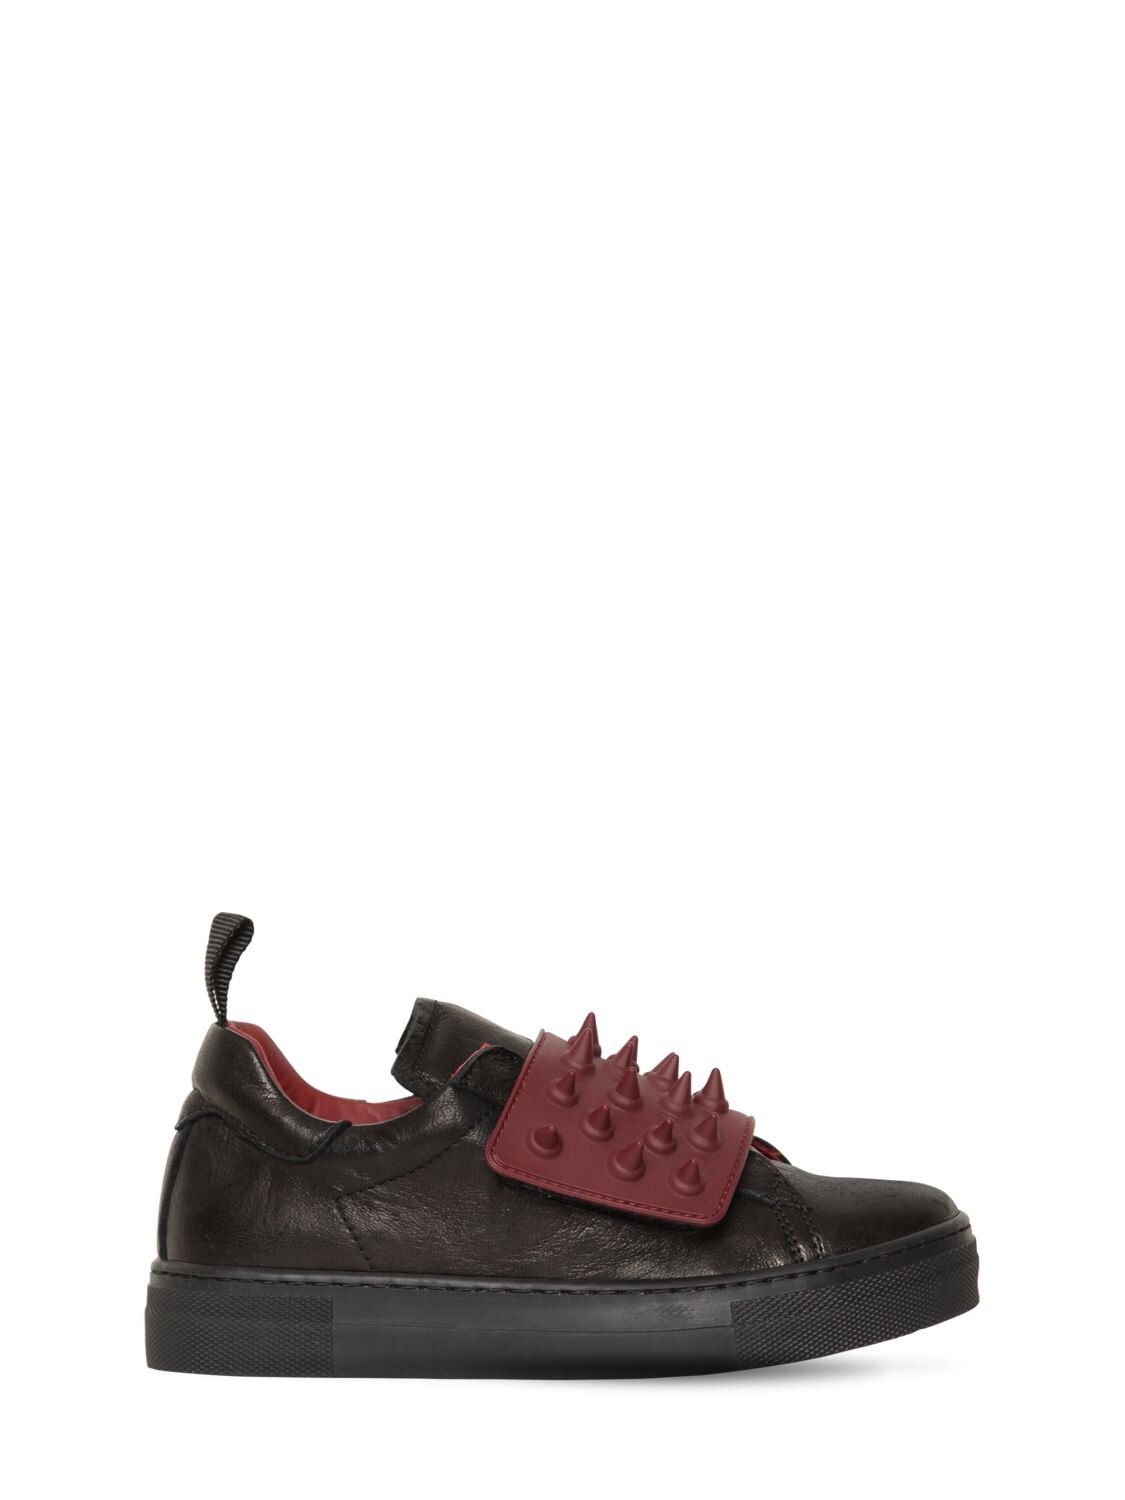 Am 66 Kids' Spiked Leather Sneakers In Black,bordeaux